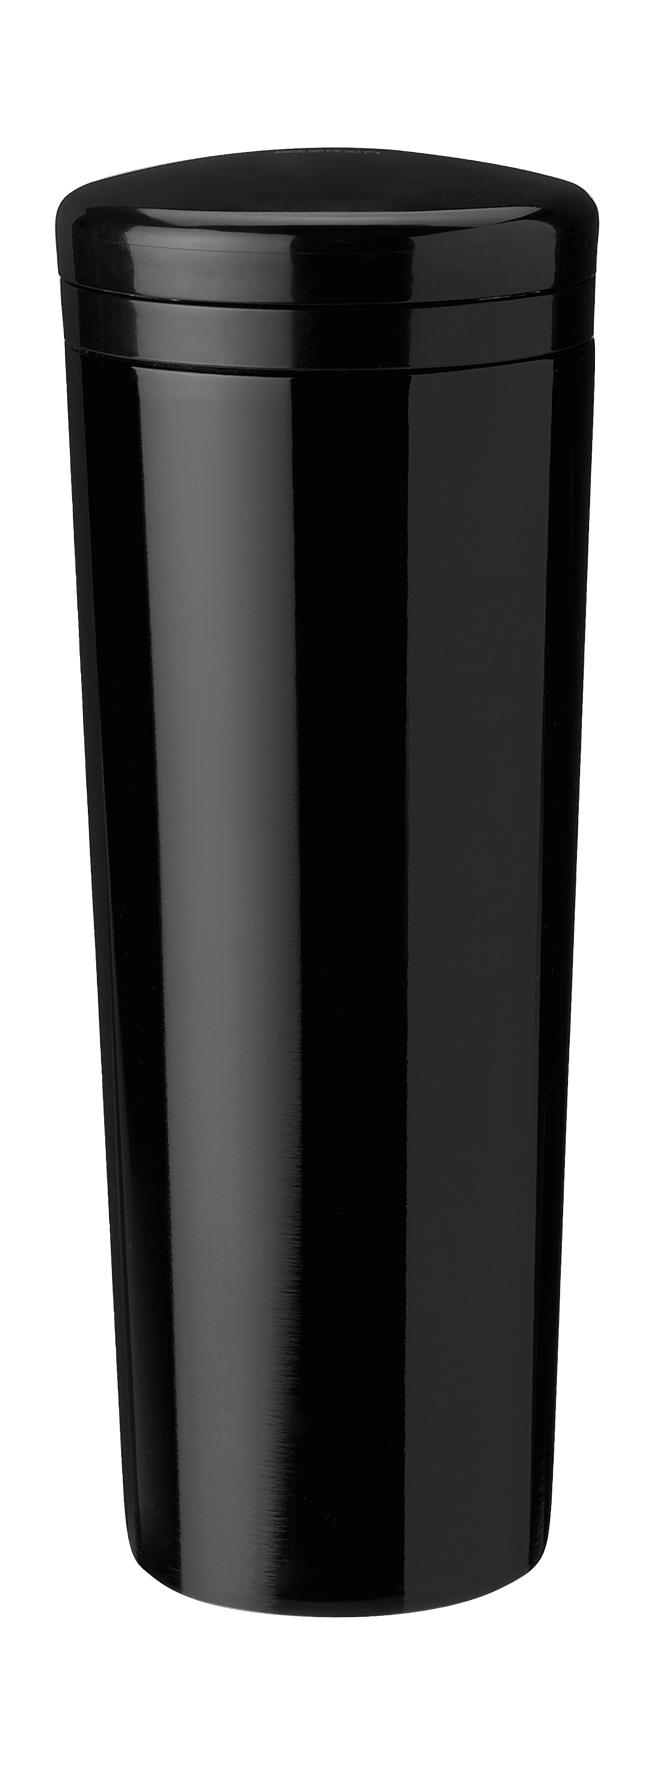 Stelton Carrie Thermos瓶0,5 L，黑色